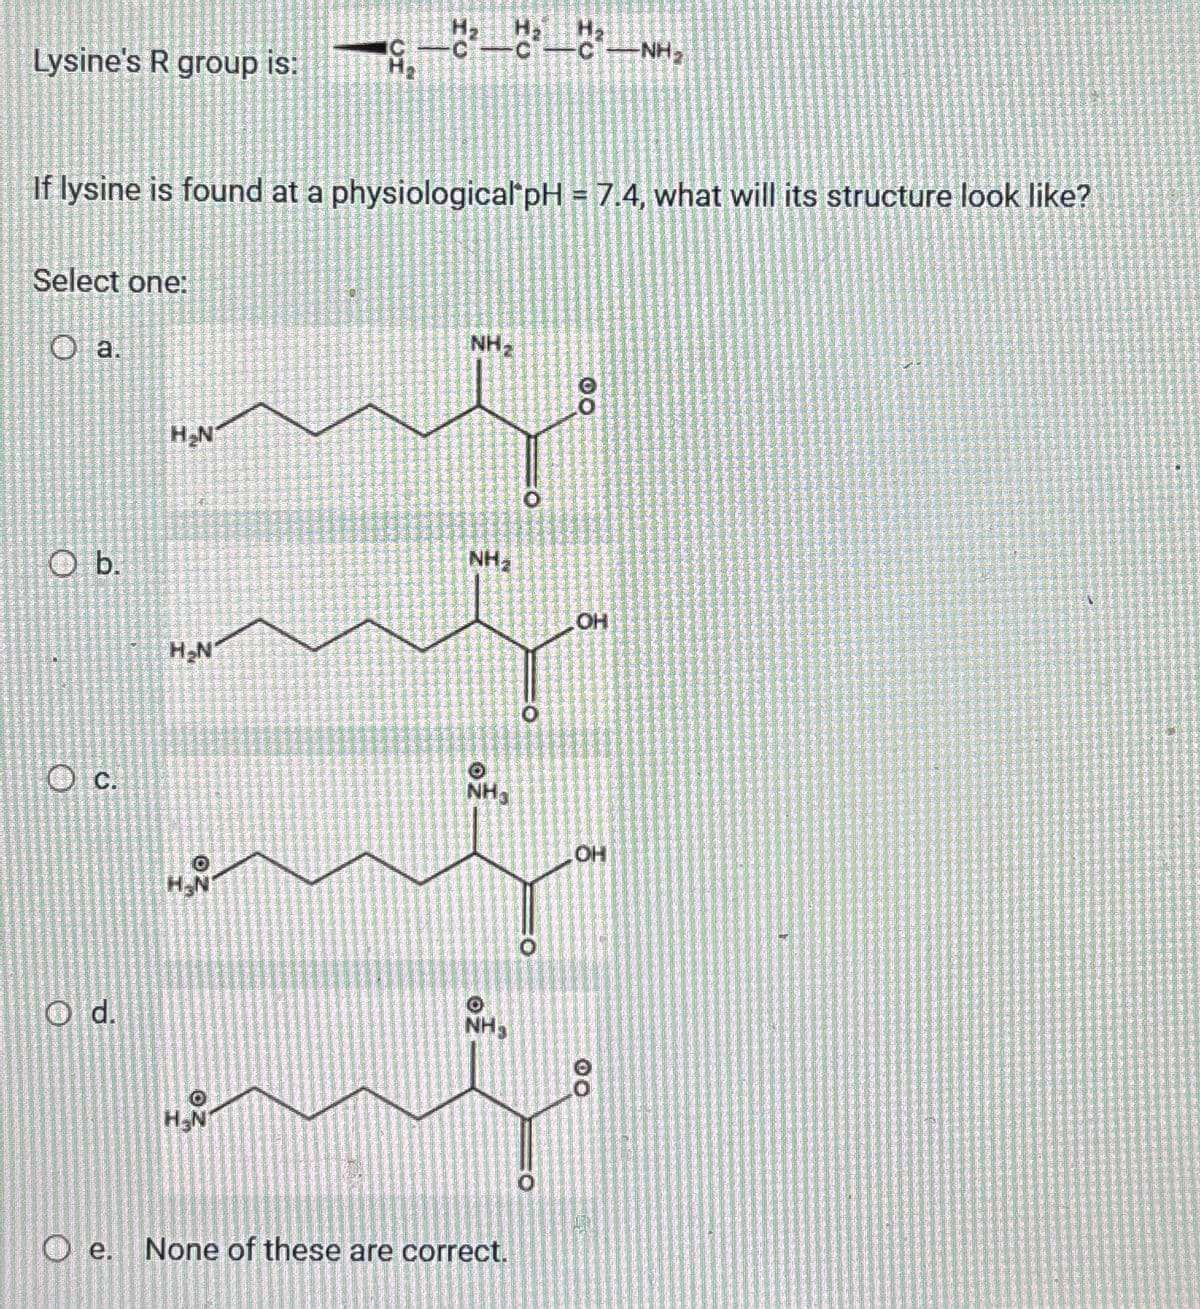 Lysine's R group is:
___NH2
If lysine is found at a physiological pH = 7.4, what will its structure look like?
Select one:
Oa.
NH
O b.
OC.
H₂N
O d.
H₂N'
H.N
NH
00
NH3
OH
CO
O e. None of these are correct.
OH